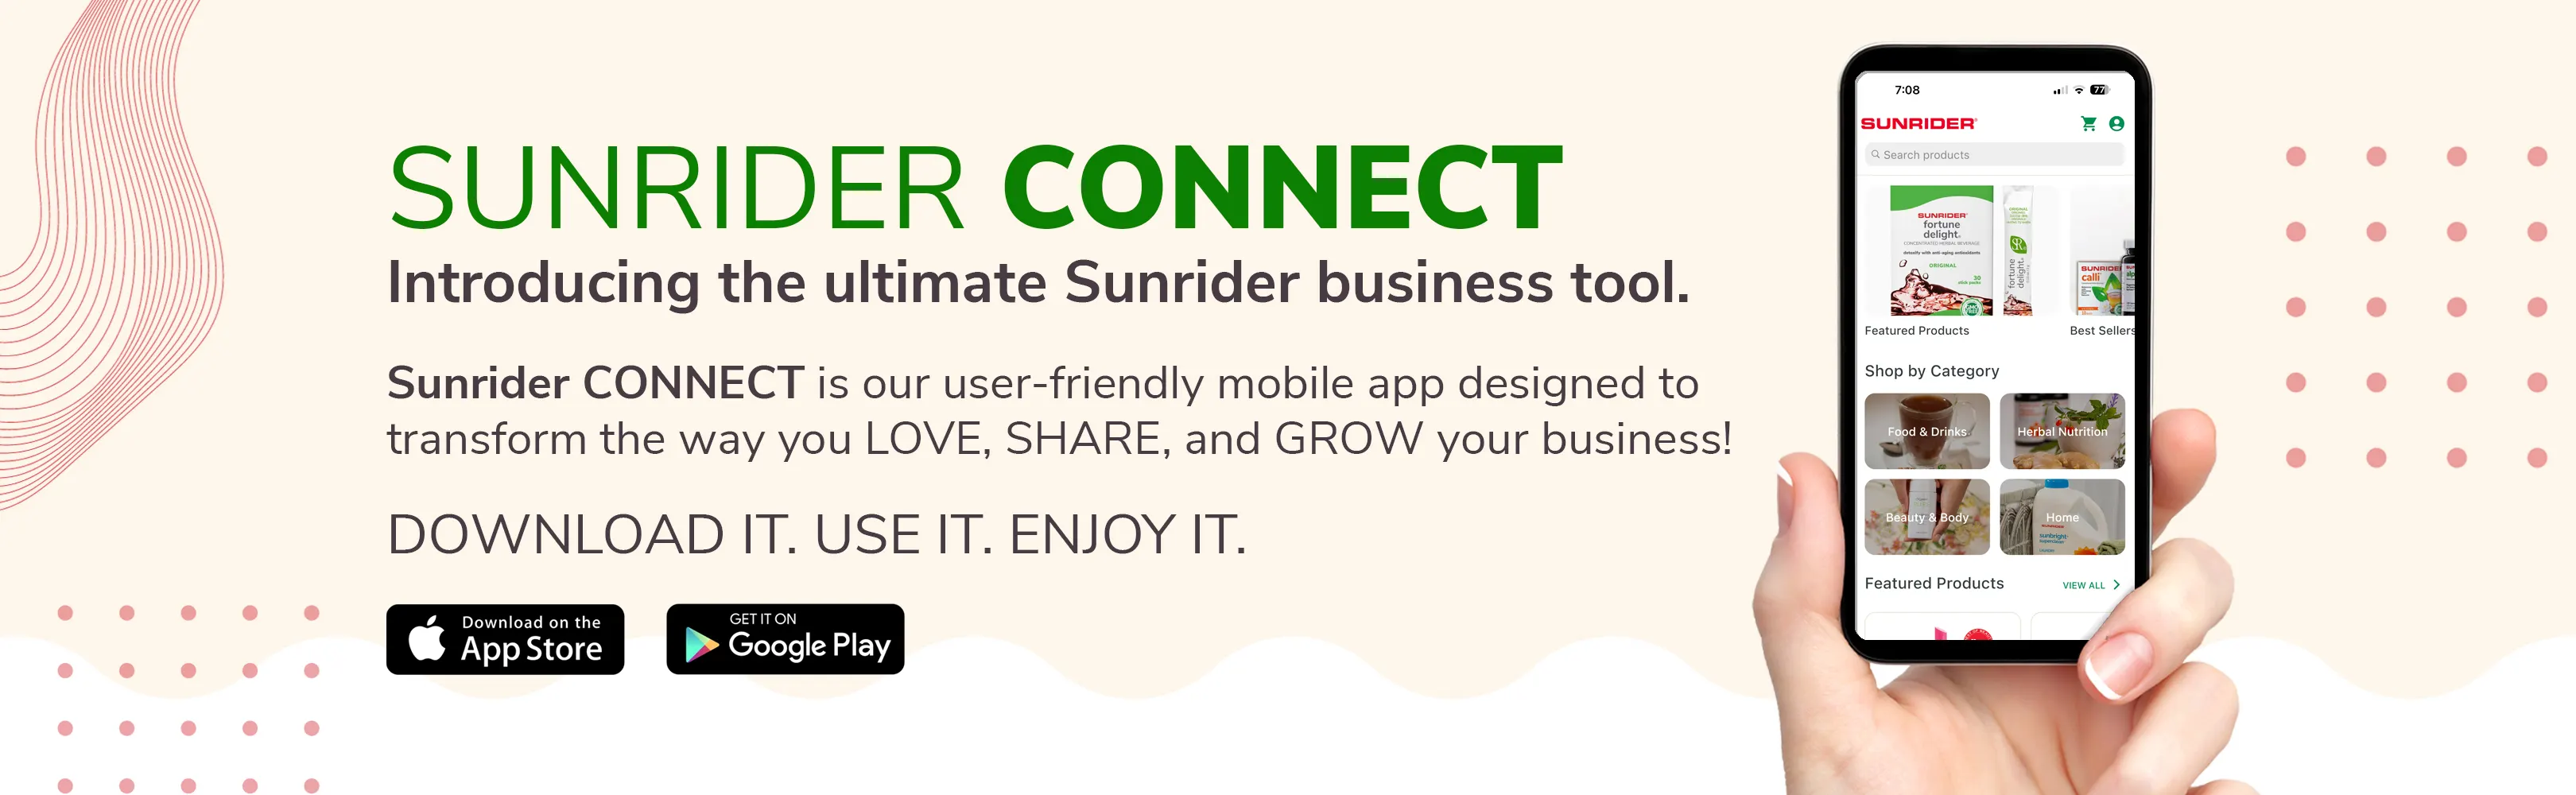 CA-Sunrider-Connect-Carousel-Eng 12.23